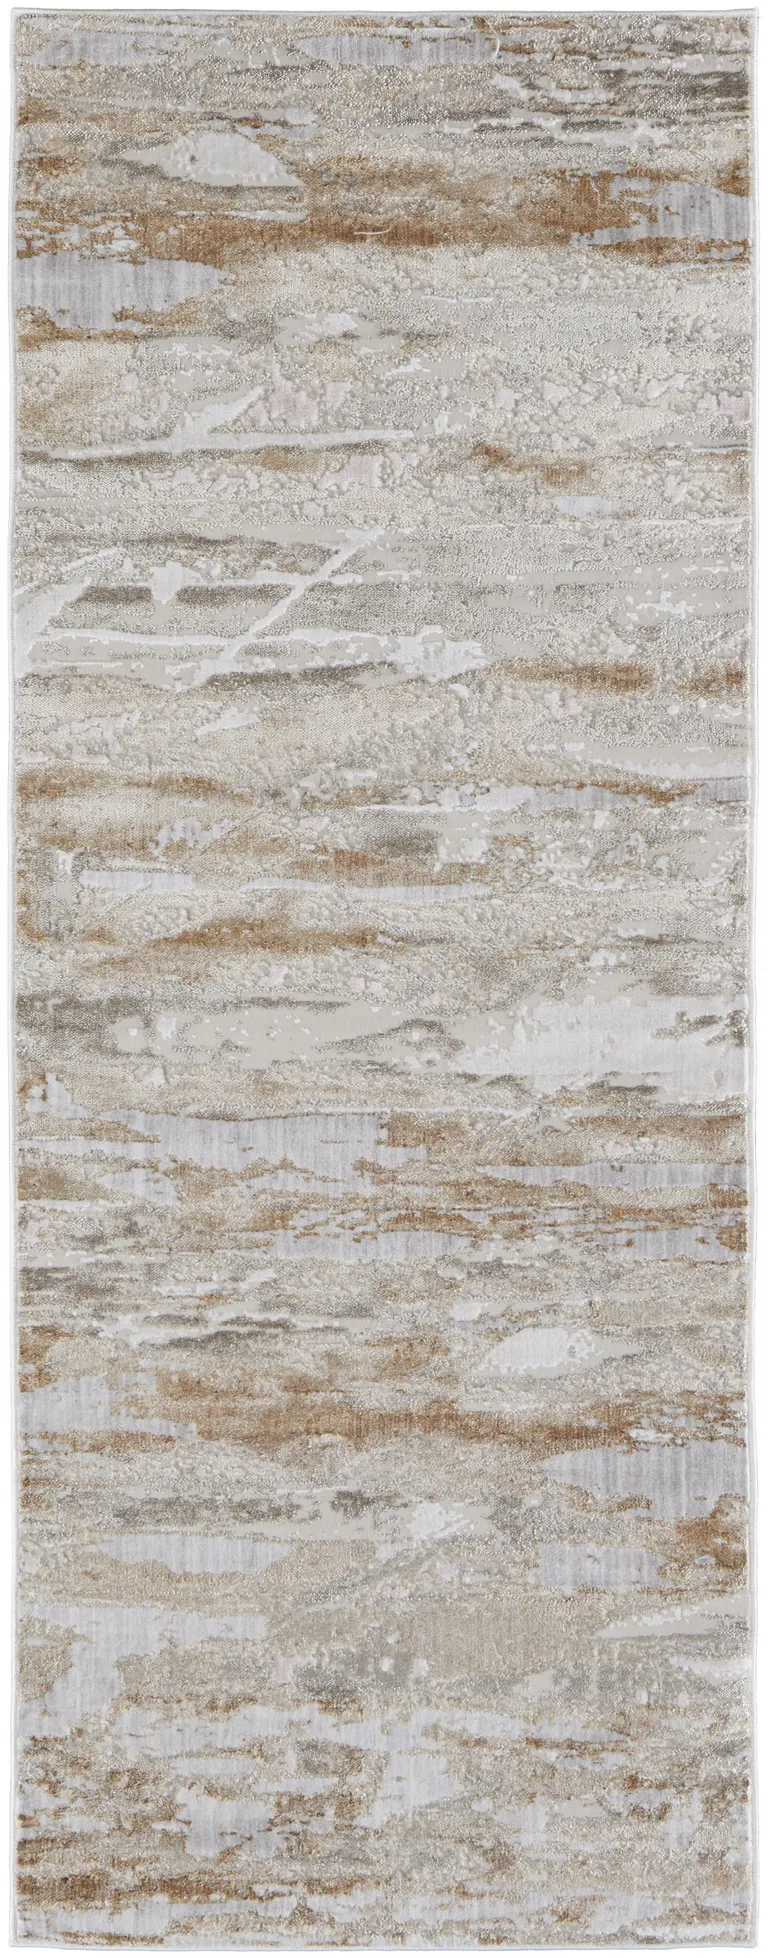 12' Tan And Ivory Abstract Power Loom Distressed Runner Rug Photo 1